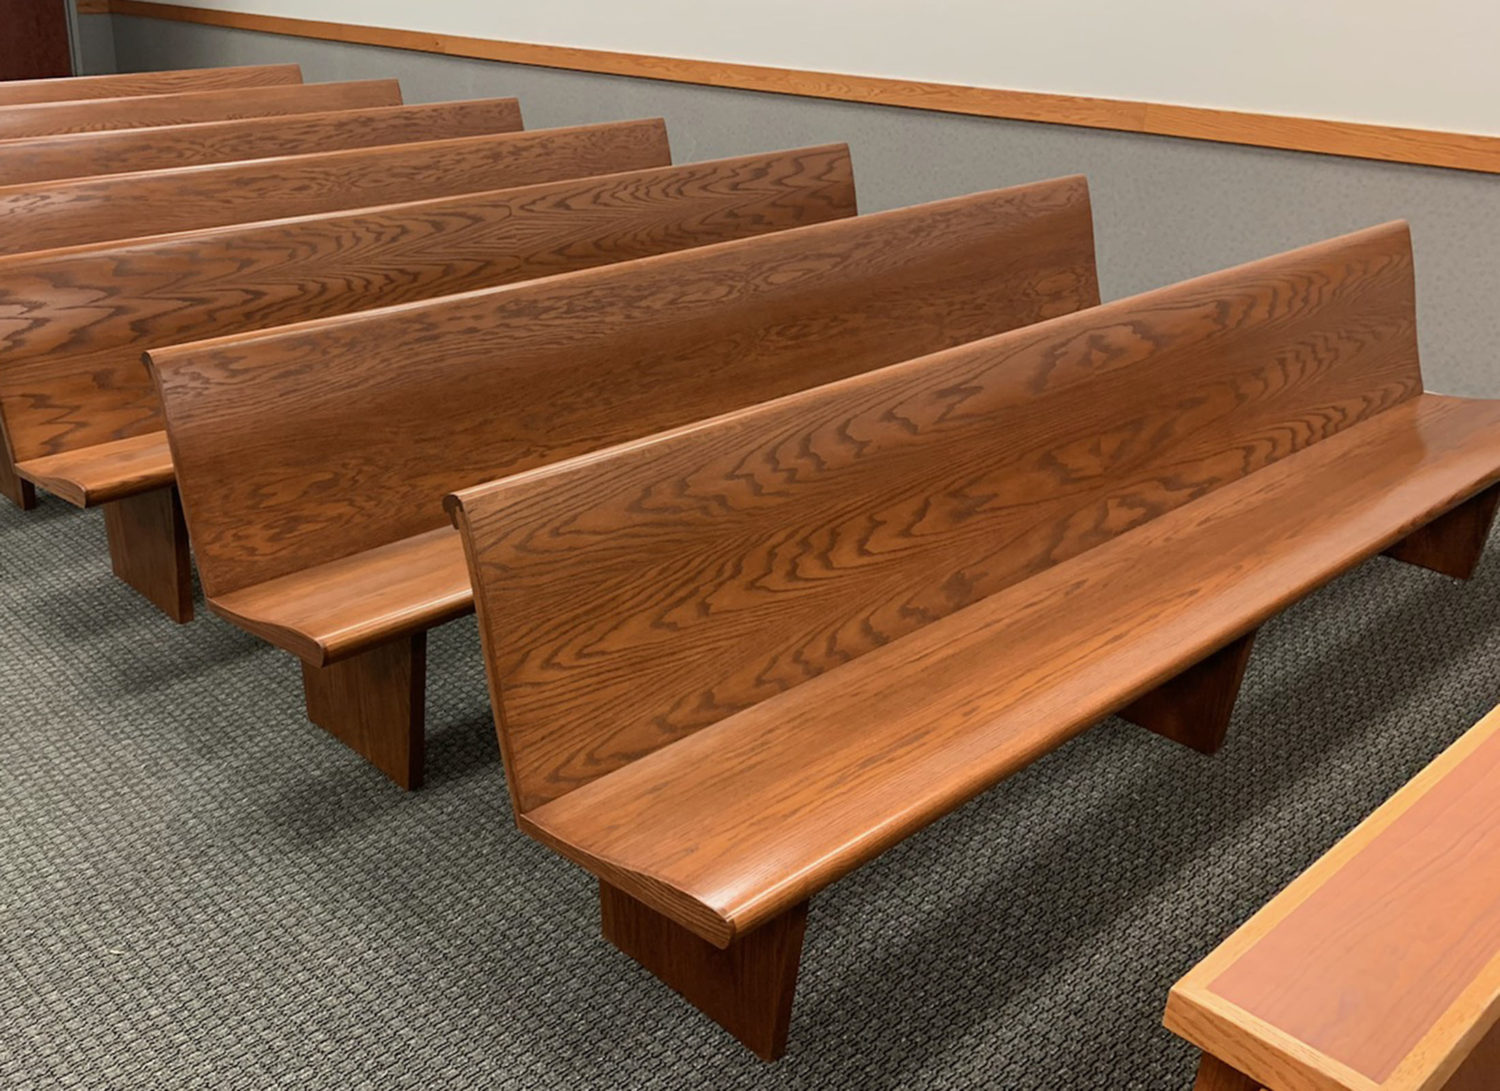 All Wood Benches inside Courtroom